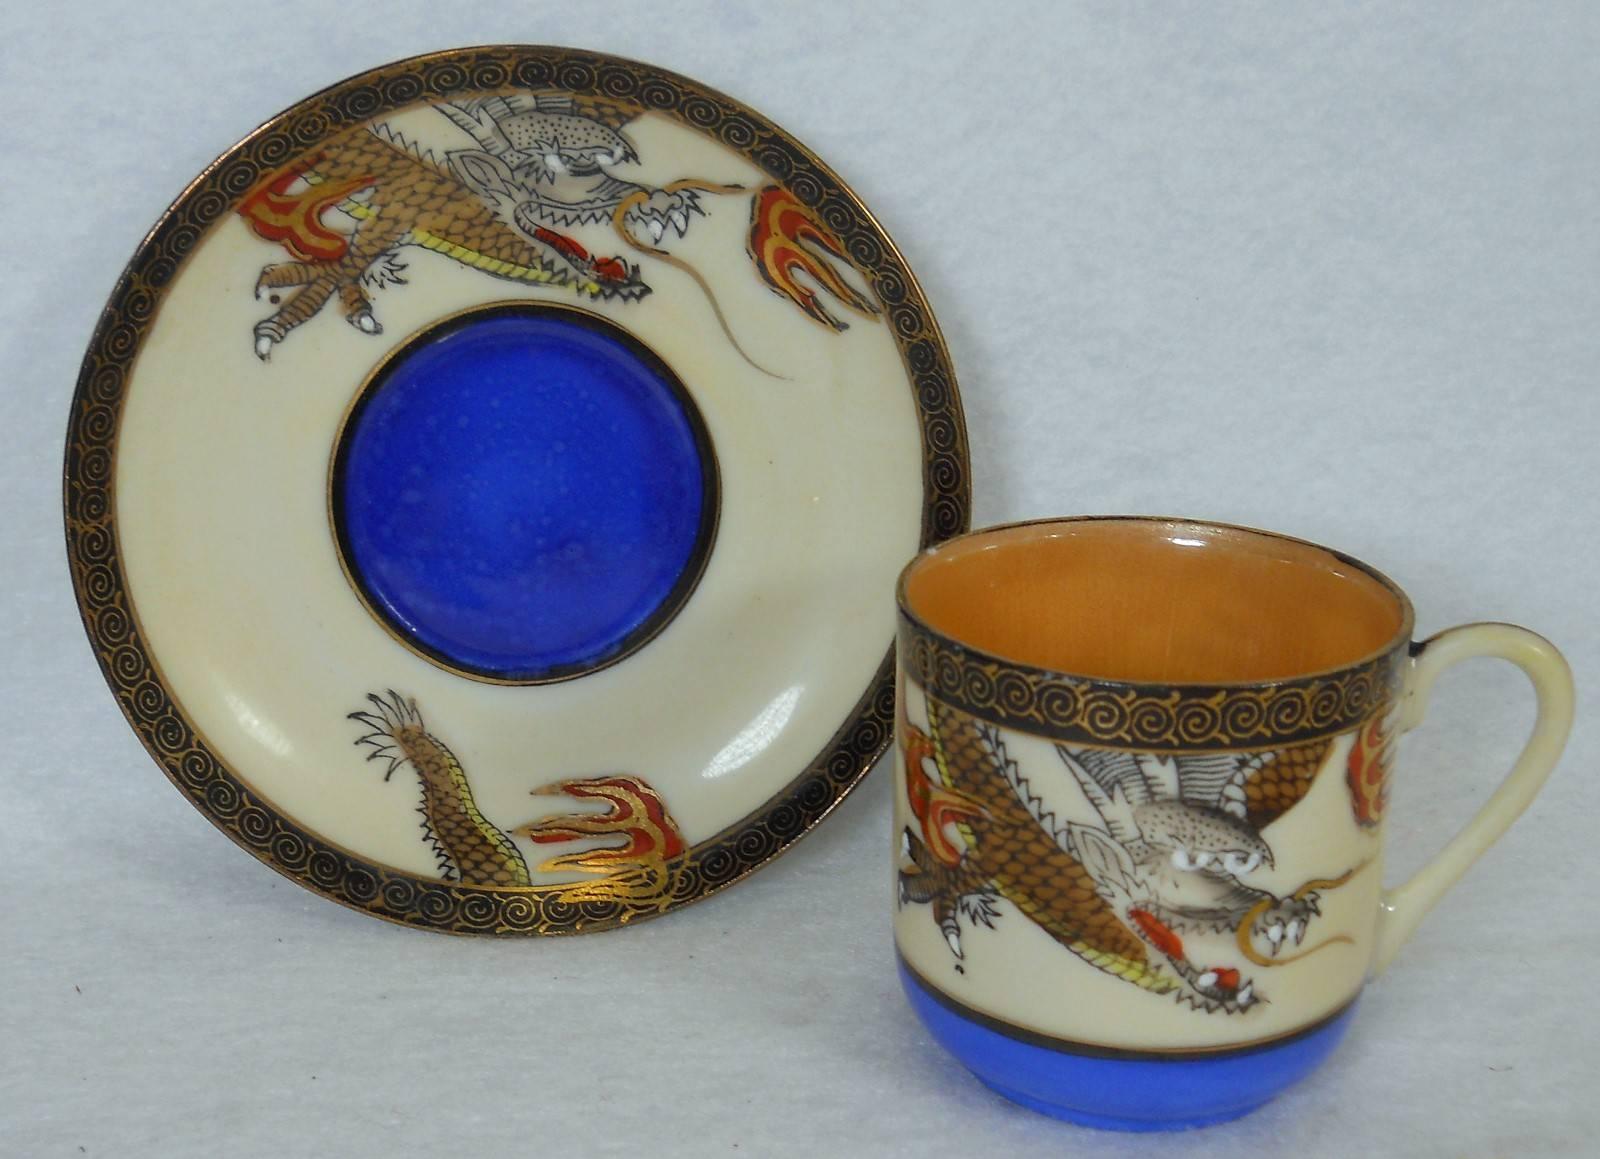 20th Century Dragonware 17-Piece Demitasse Coffee or Chocolate Set Made in Japan For Sale